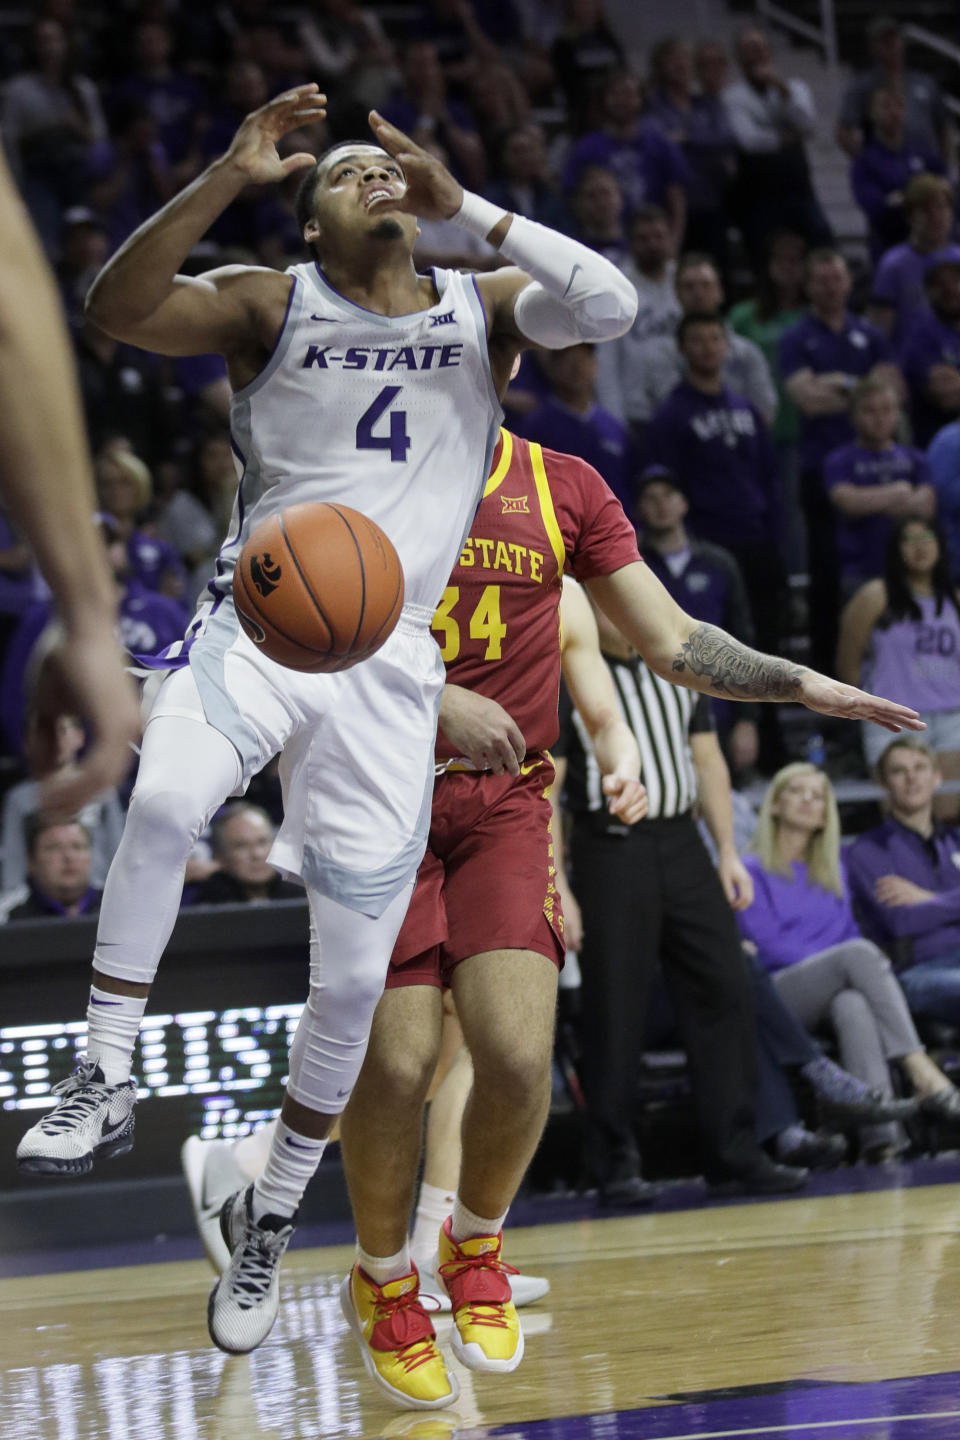 Kansas State guard David Sloan (4) is stripped of the ball by Iowa State guard Nate Jenkins (34) during the second half of an NCAA college basketball game in Manhattan, Kan., Saturday, March 7, 2020. (AP Photo/Orlin Wagner)